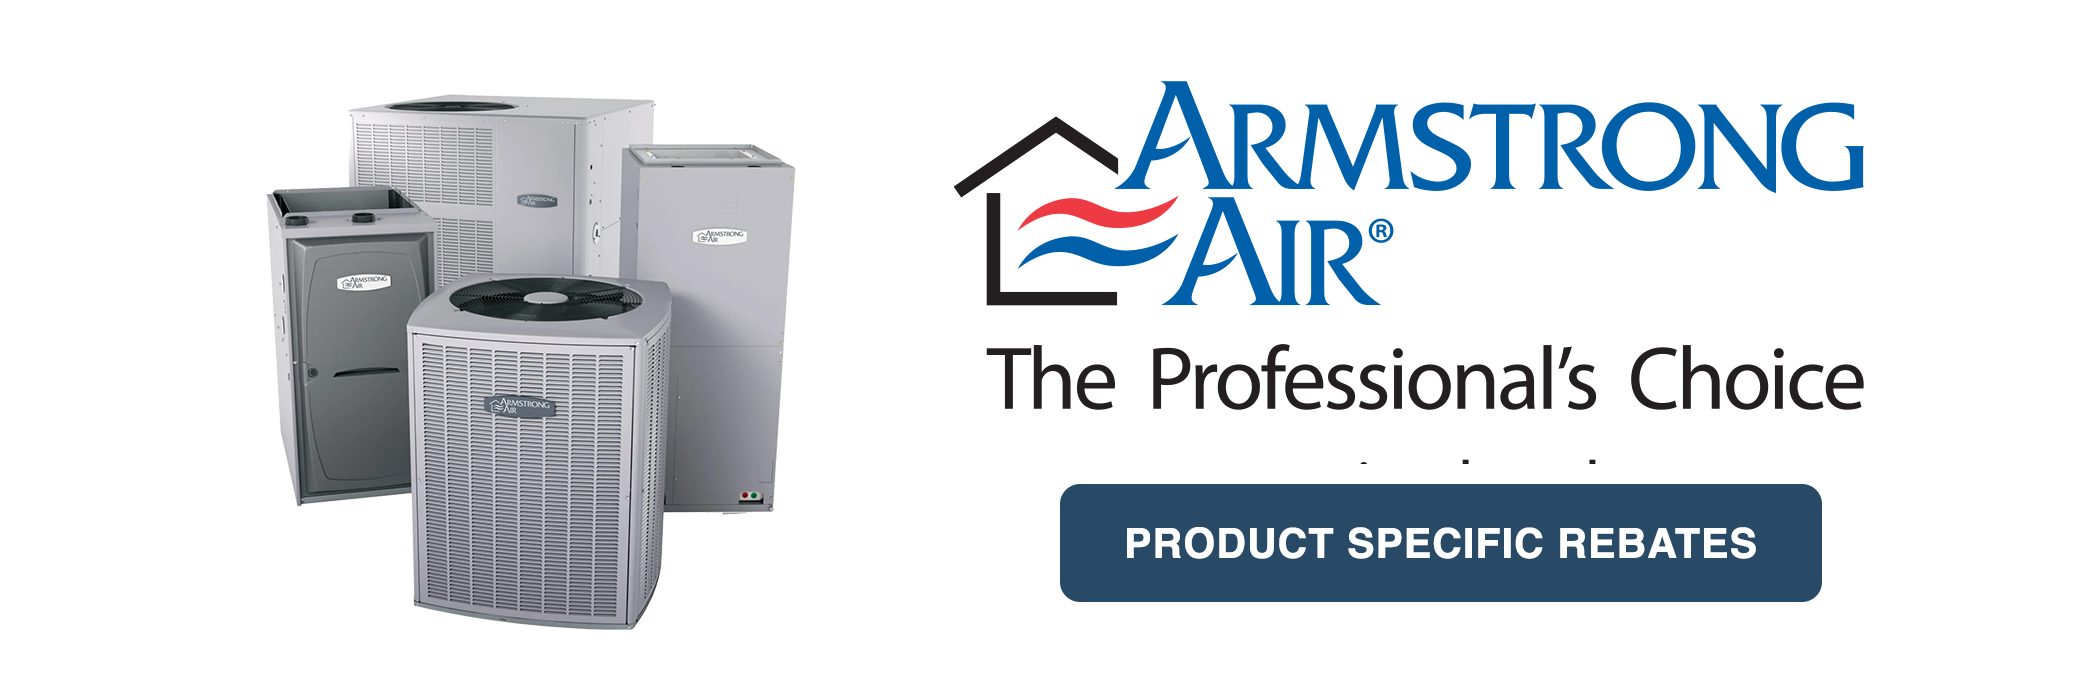 armstrong-air-residential-heating-cooling-home-hvac